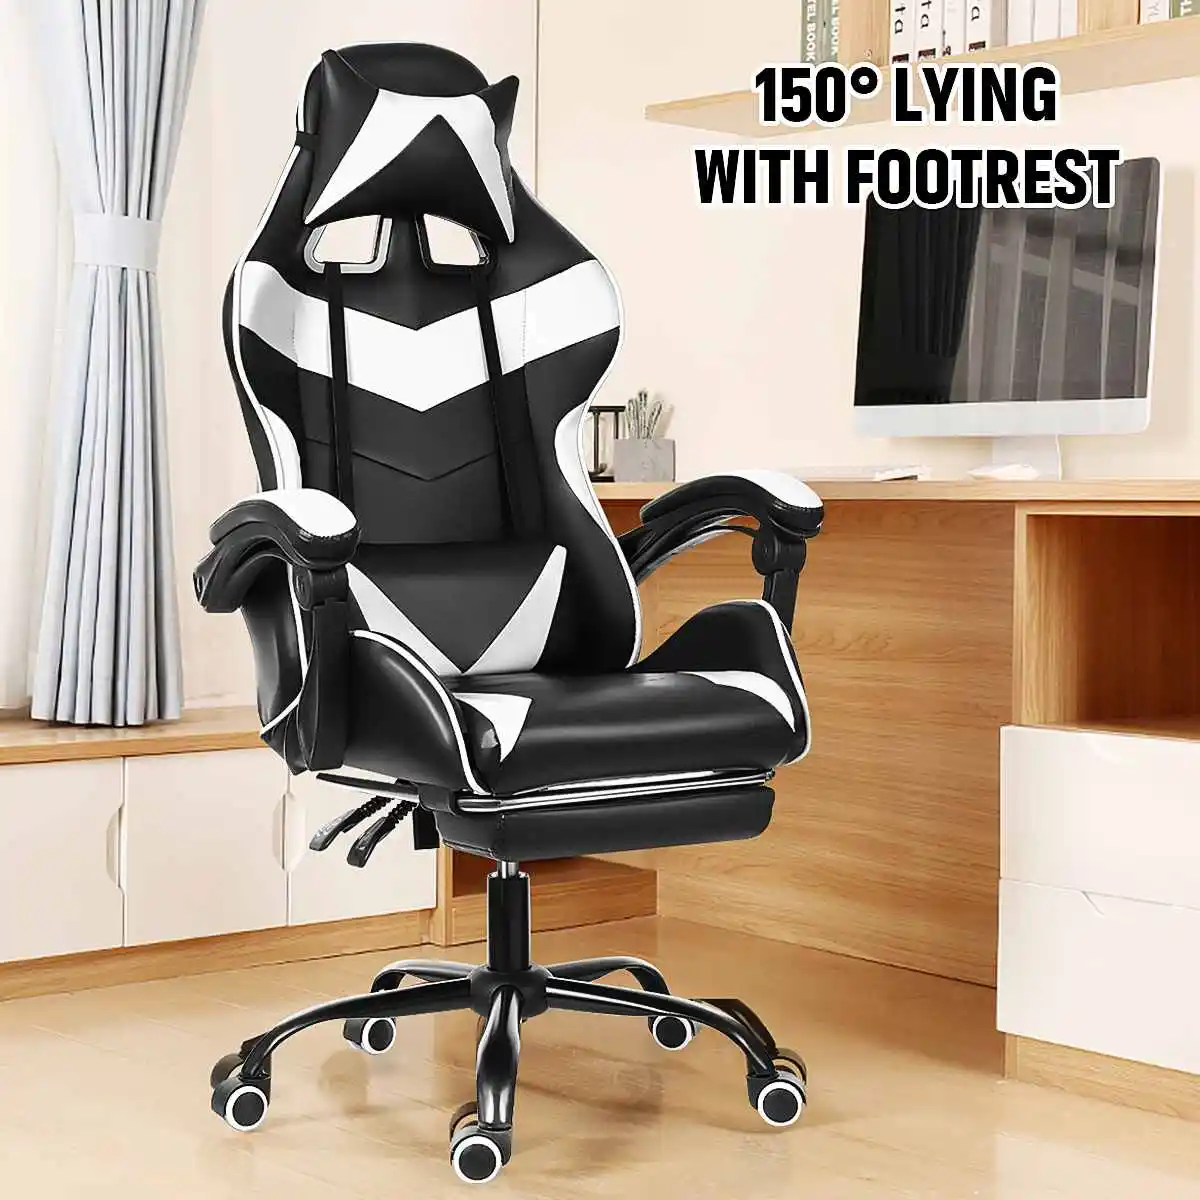 RTX Ergonomic Recliner Gaming Chair With Cushion Armrest